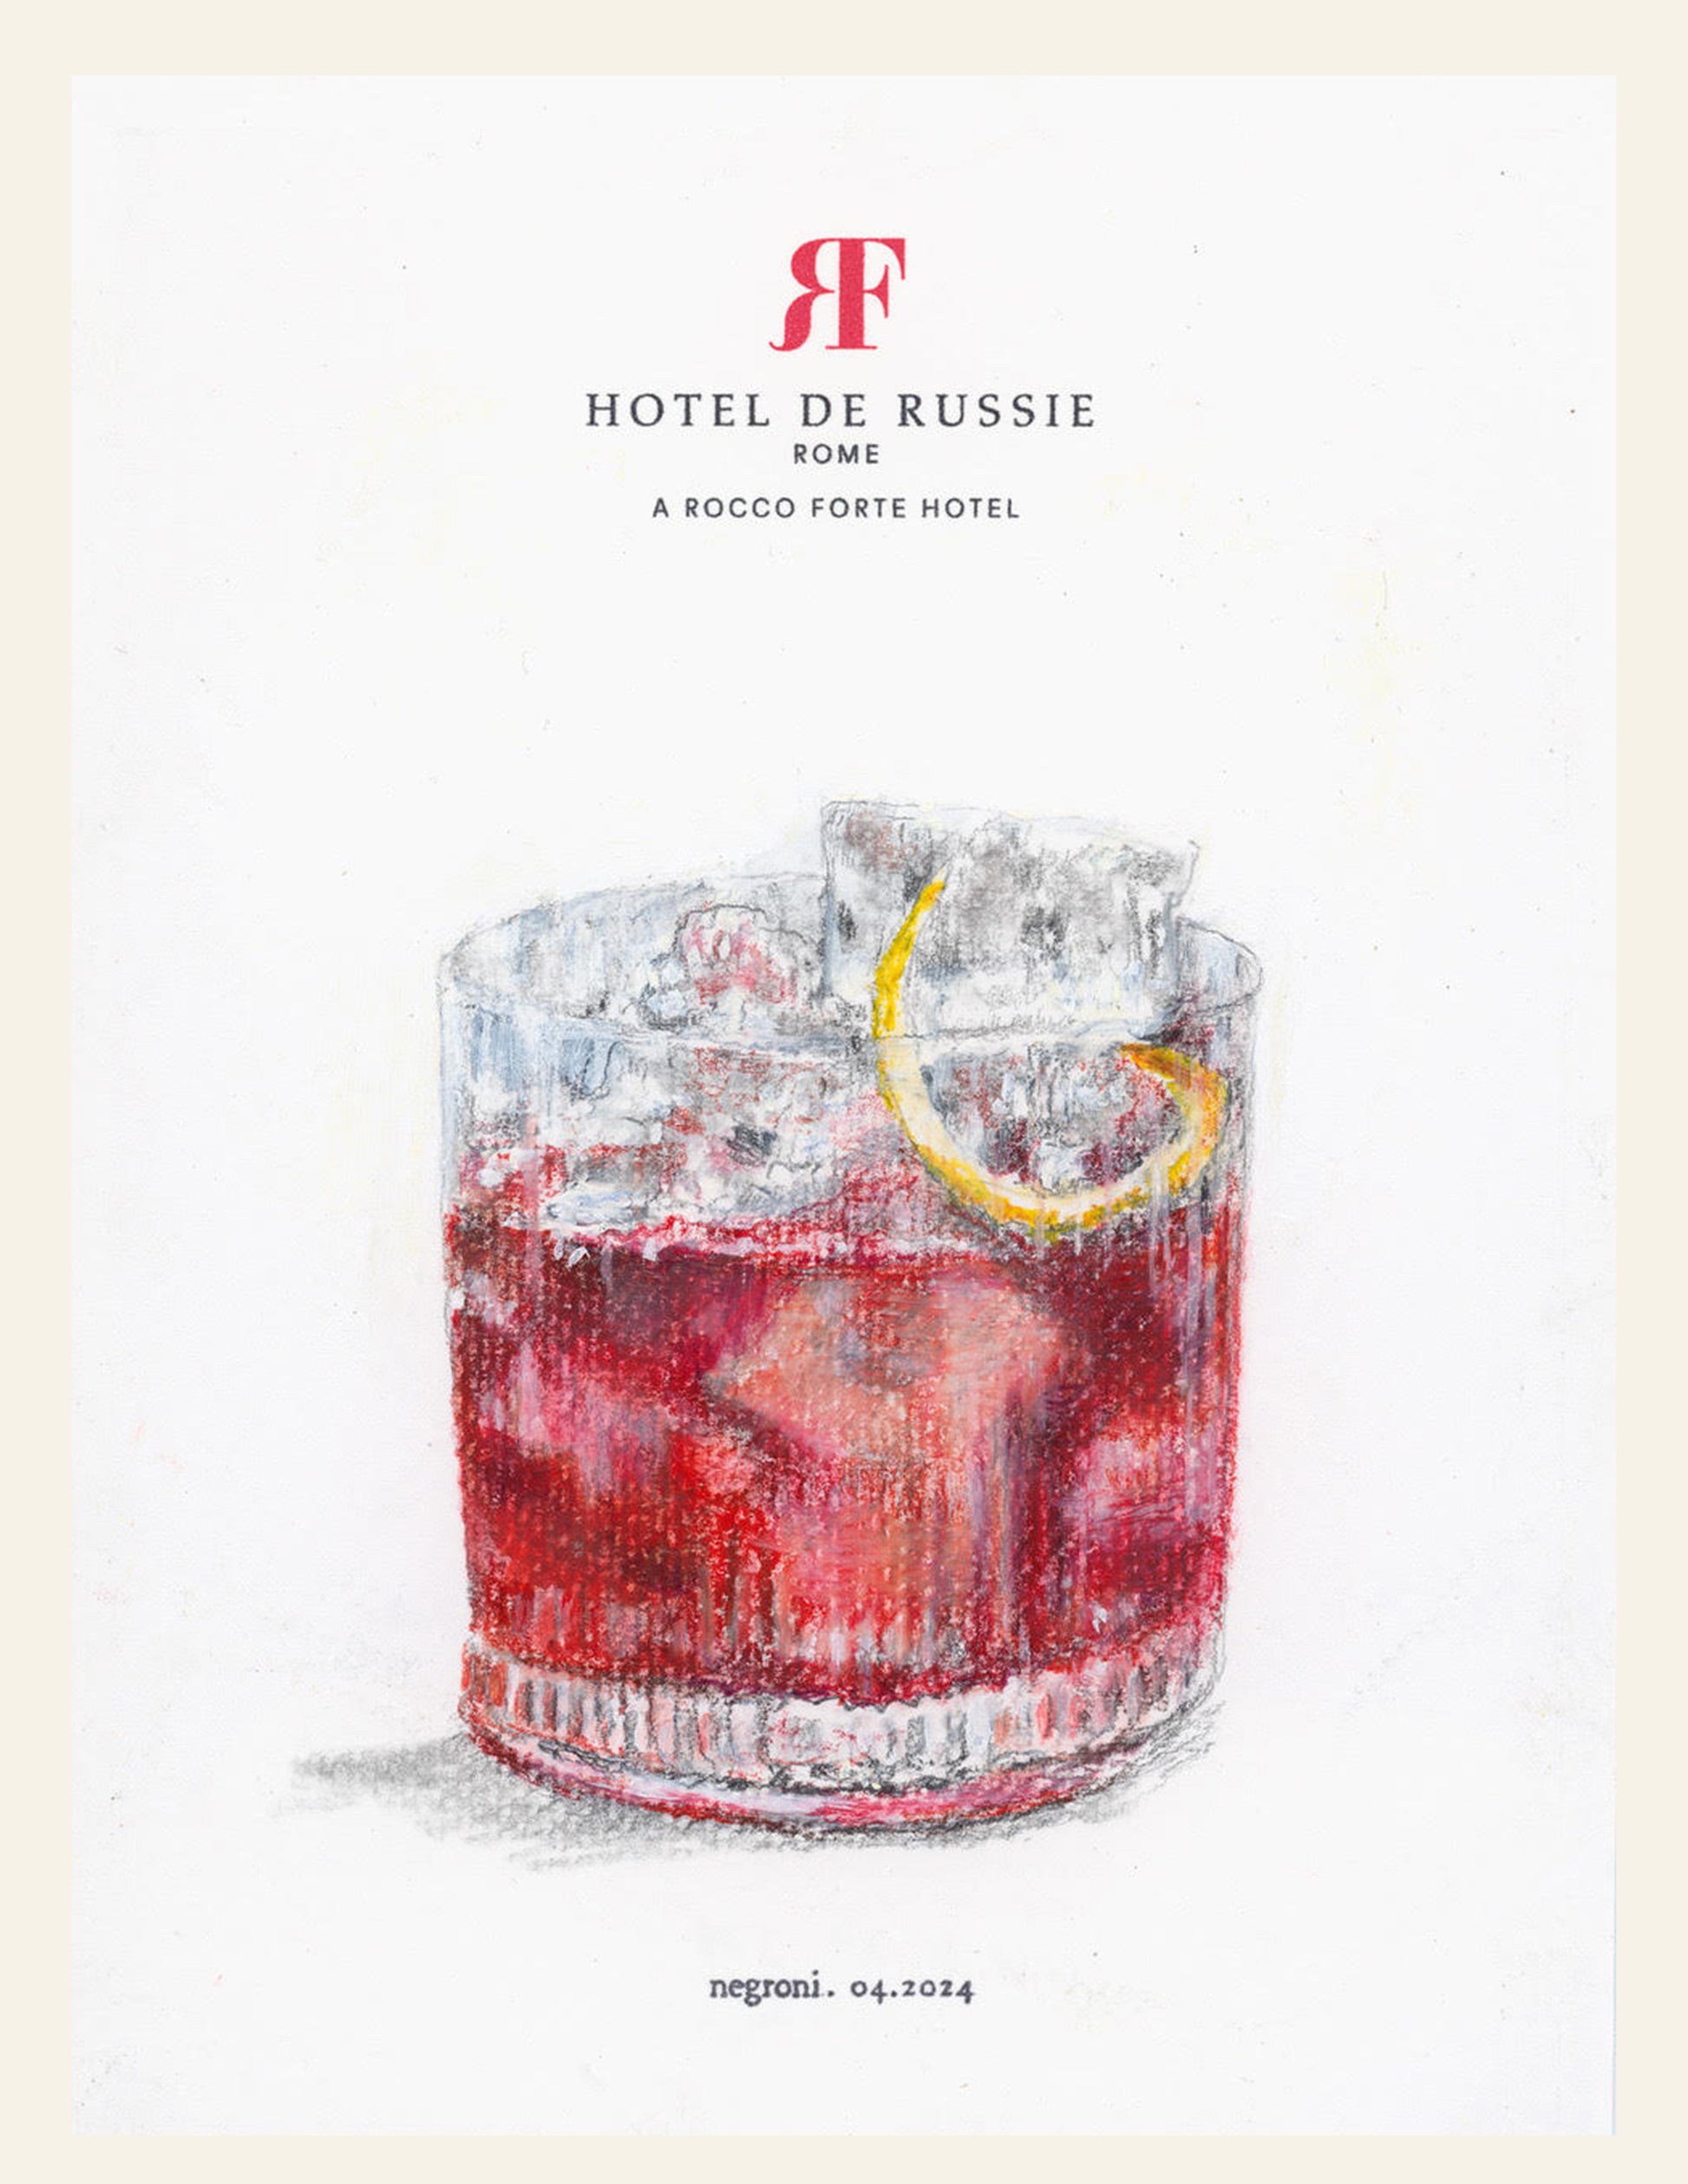 Negroni on Hotel de Russie Rome by J. Cournoyer